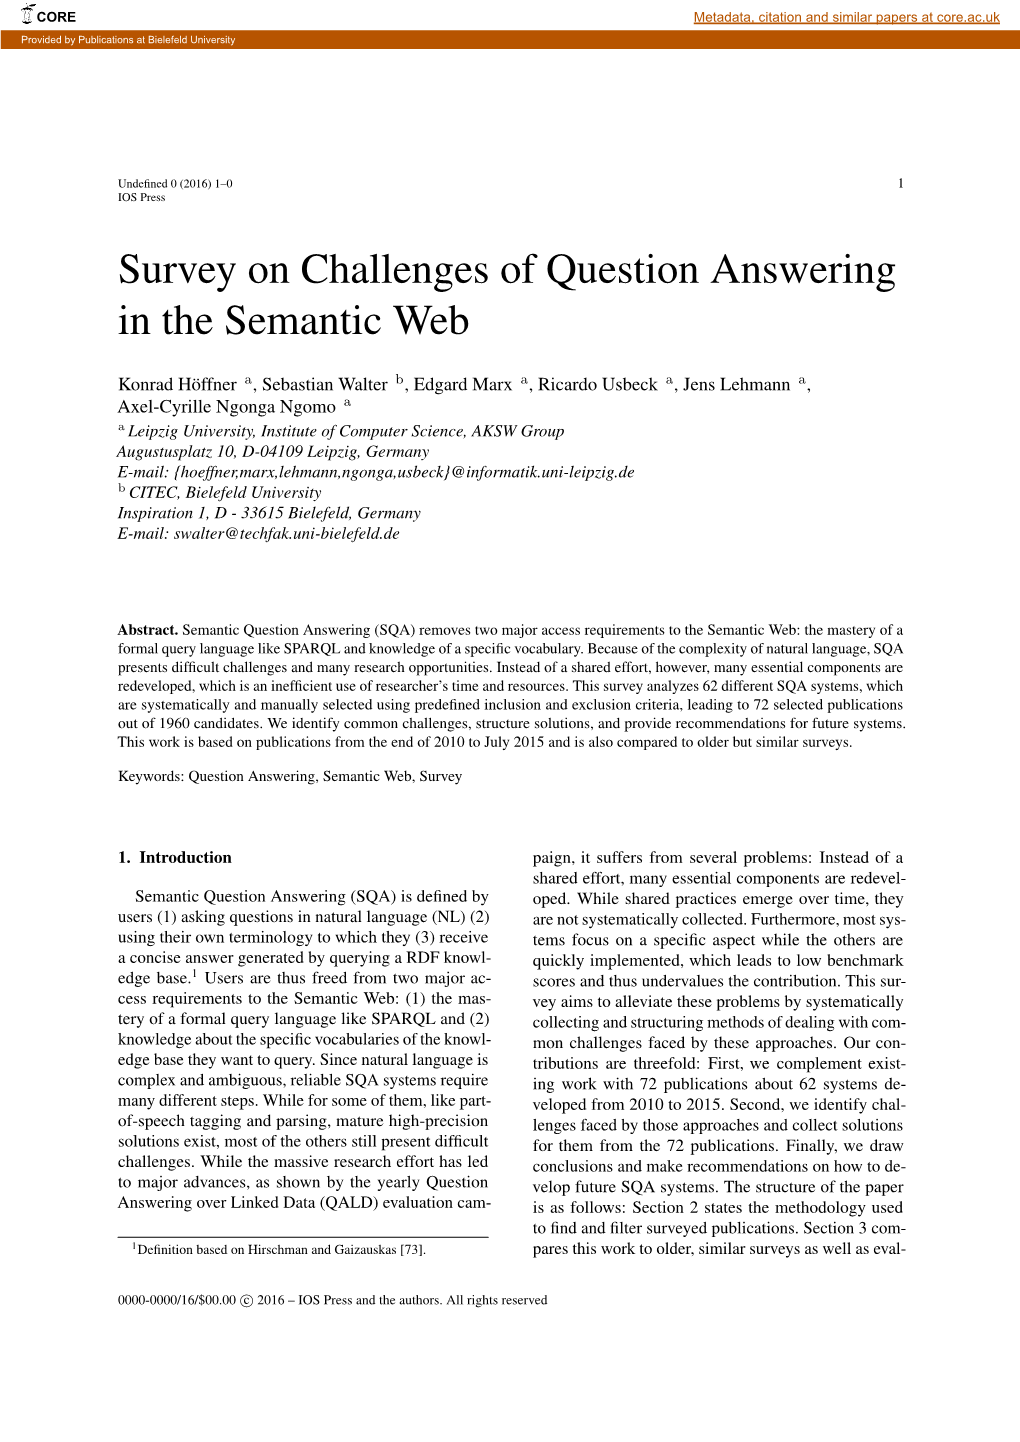 Survey on Challenges of Question Answering in the Semantic Web